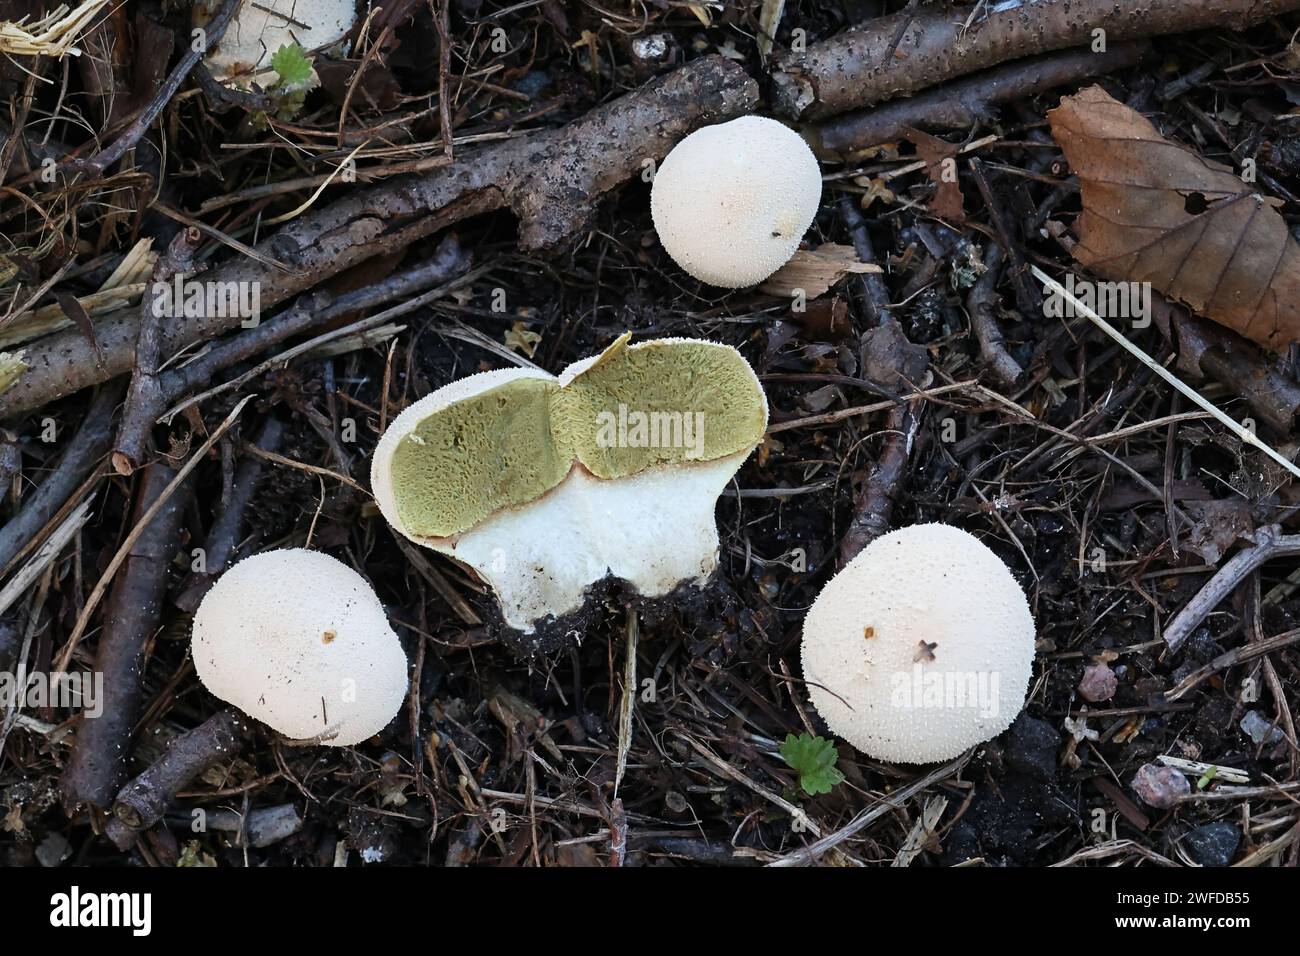 Lycoperdon pratense, also called Vascellum pratense, commonly known as Meadow Puffball, wild fungus from Finland Stock Photo